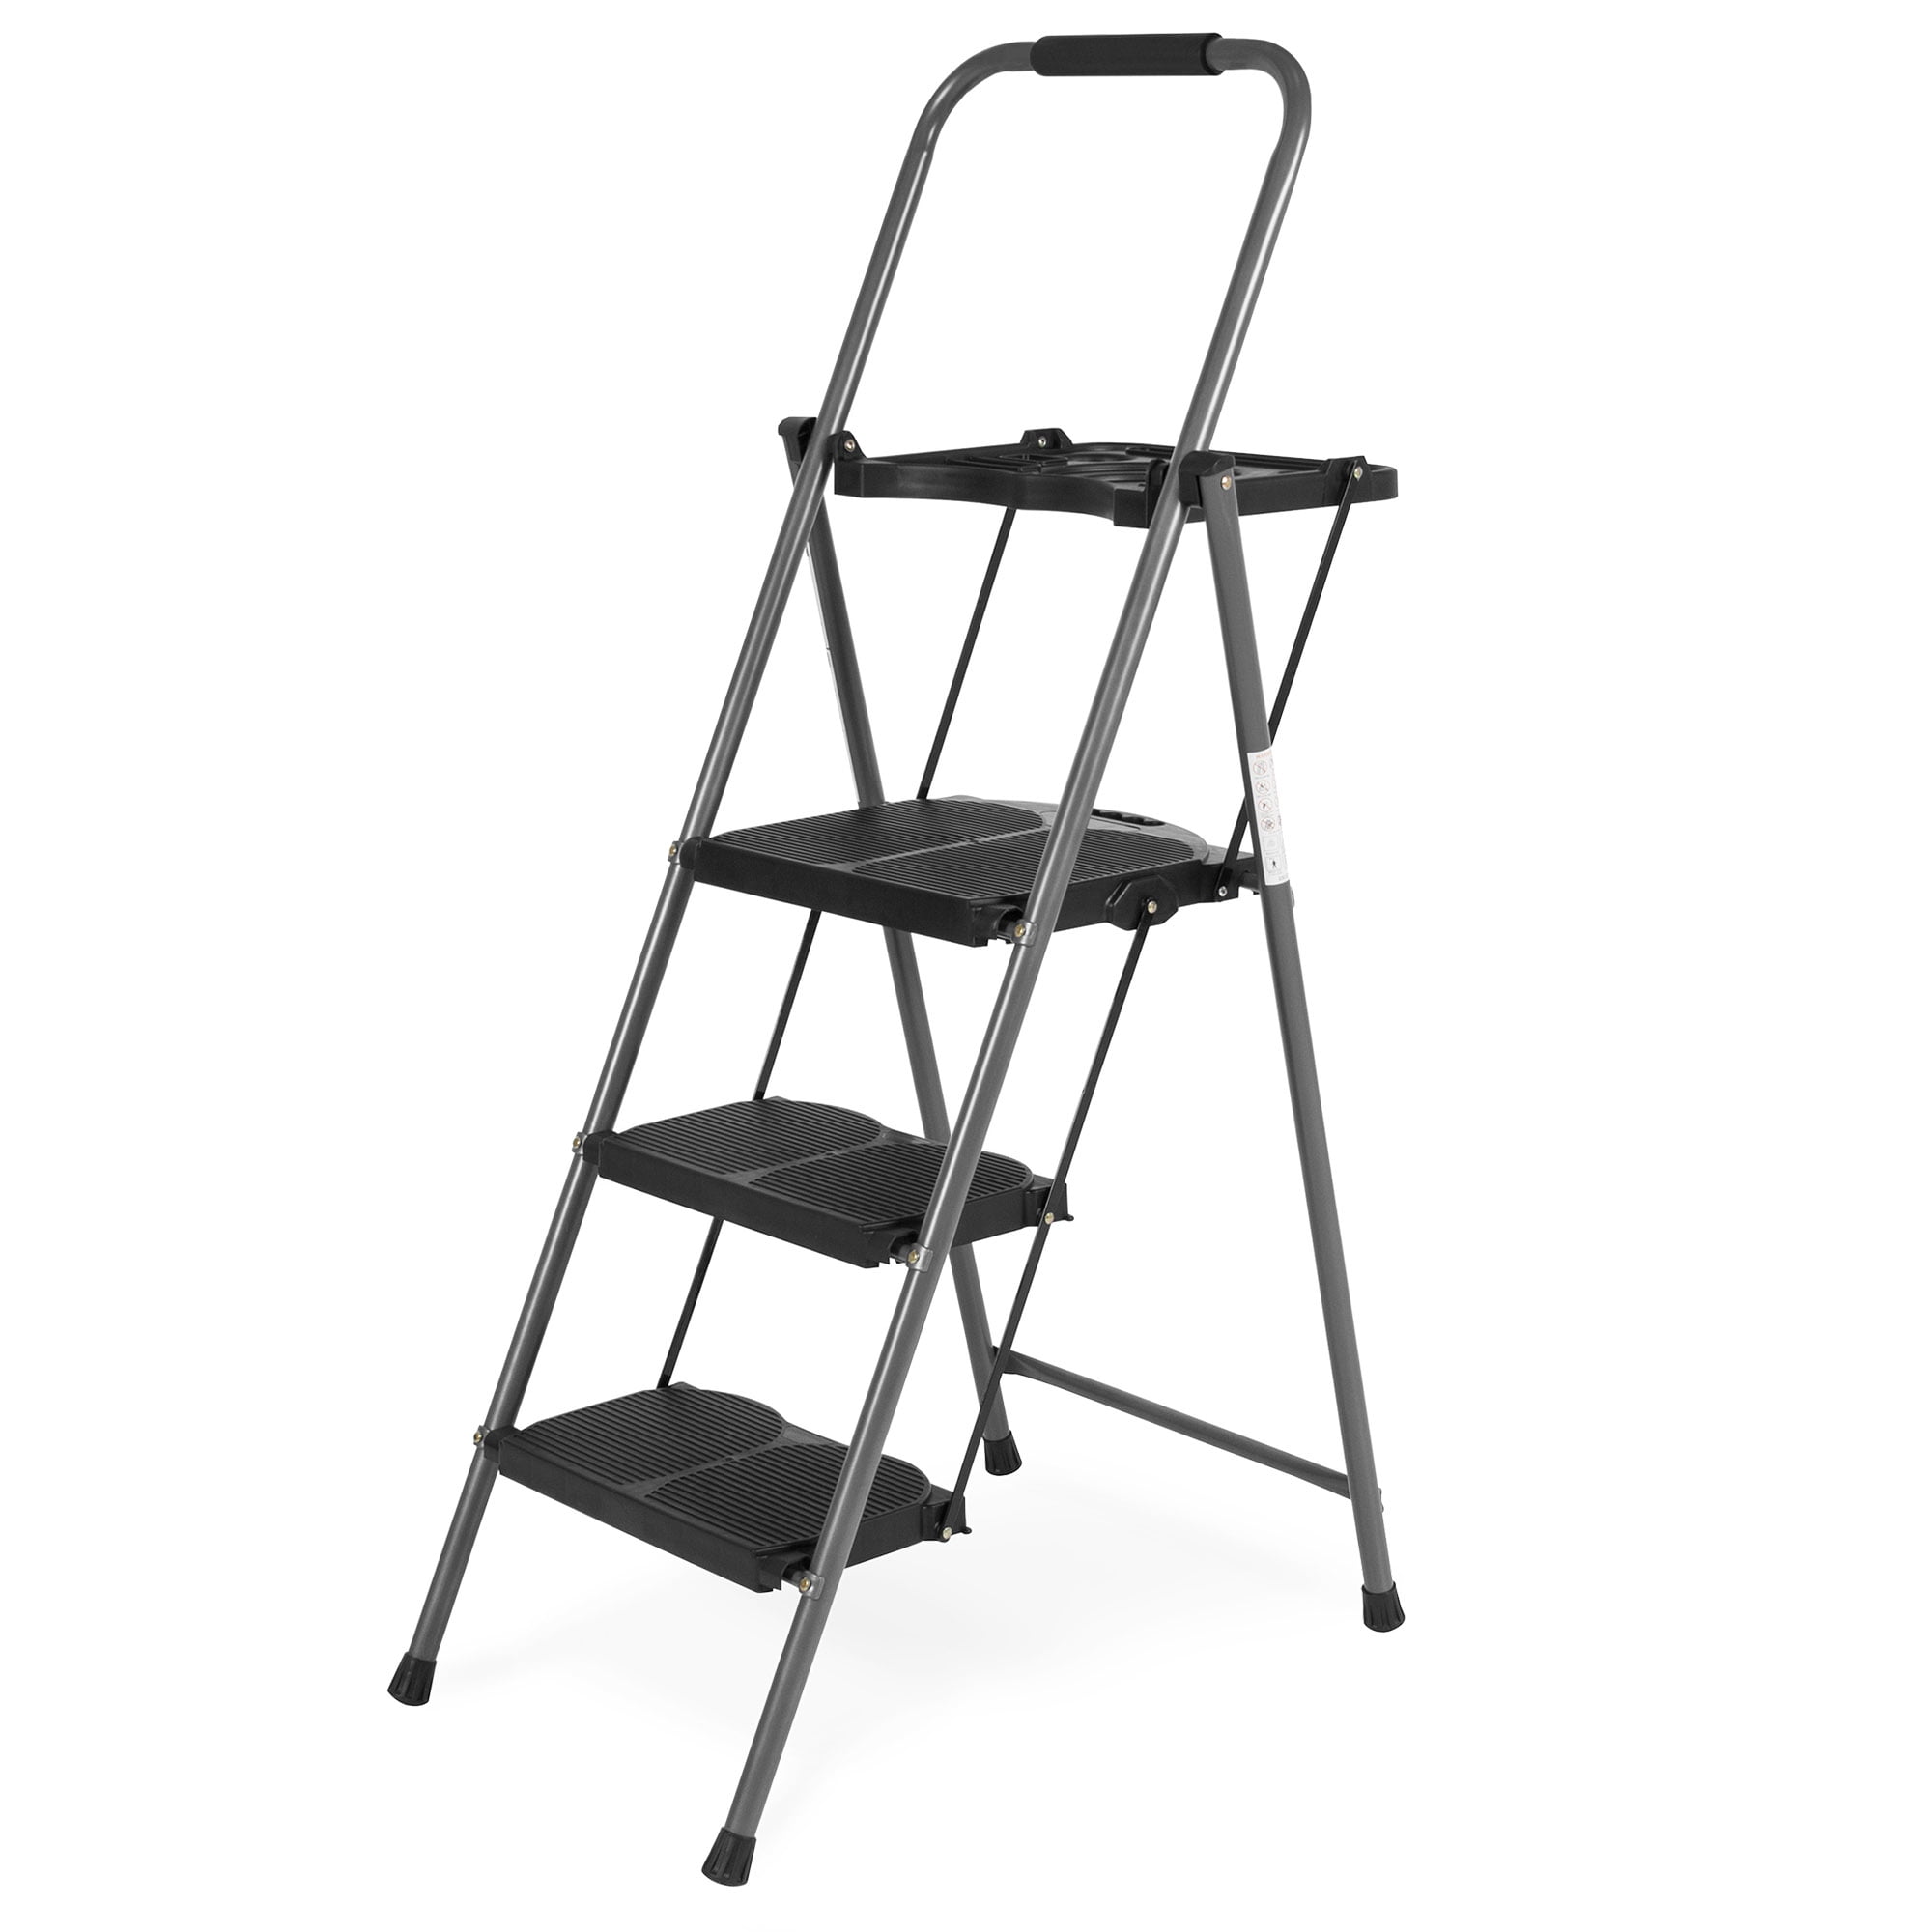 Details about   Protable 2 3 4 Steps Ladder Folding Non Slip Safety Heavy Duty Industrial Home 